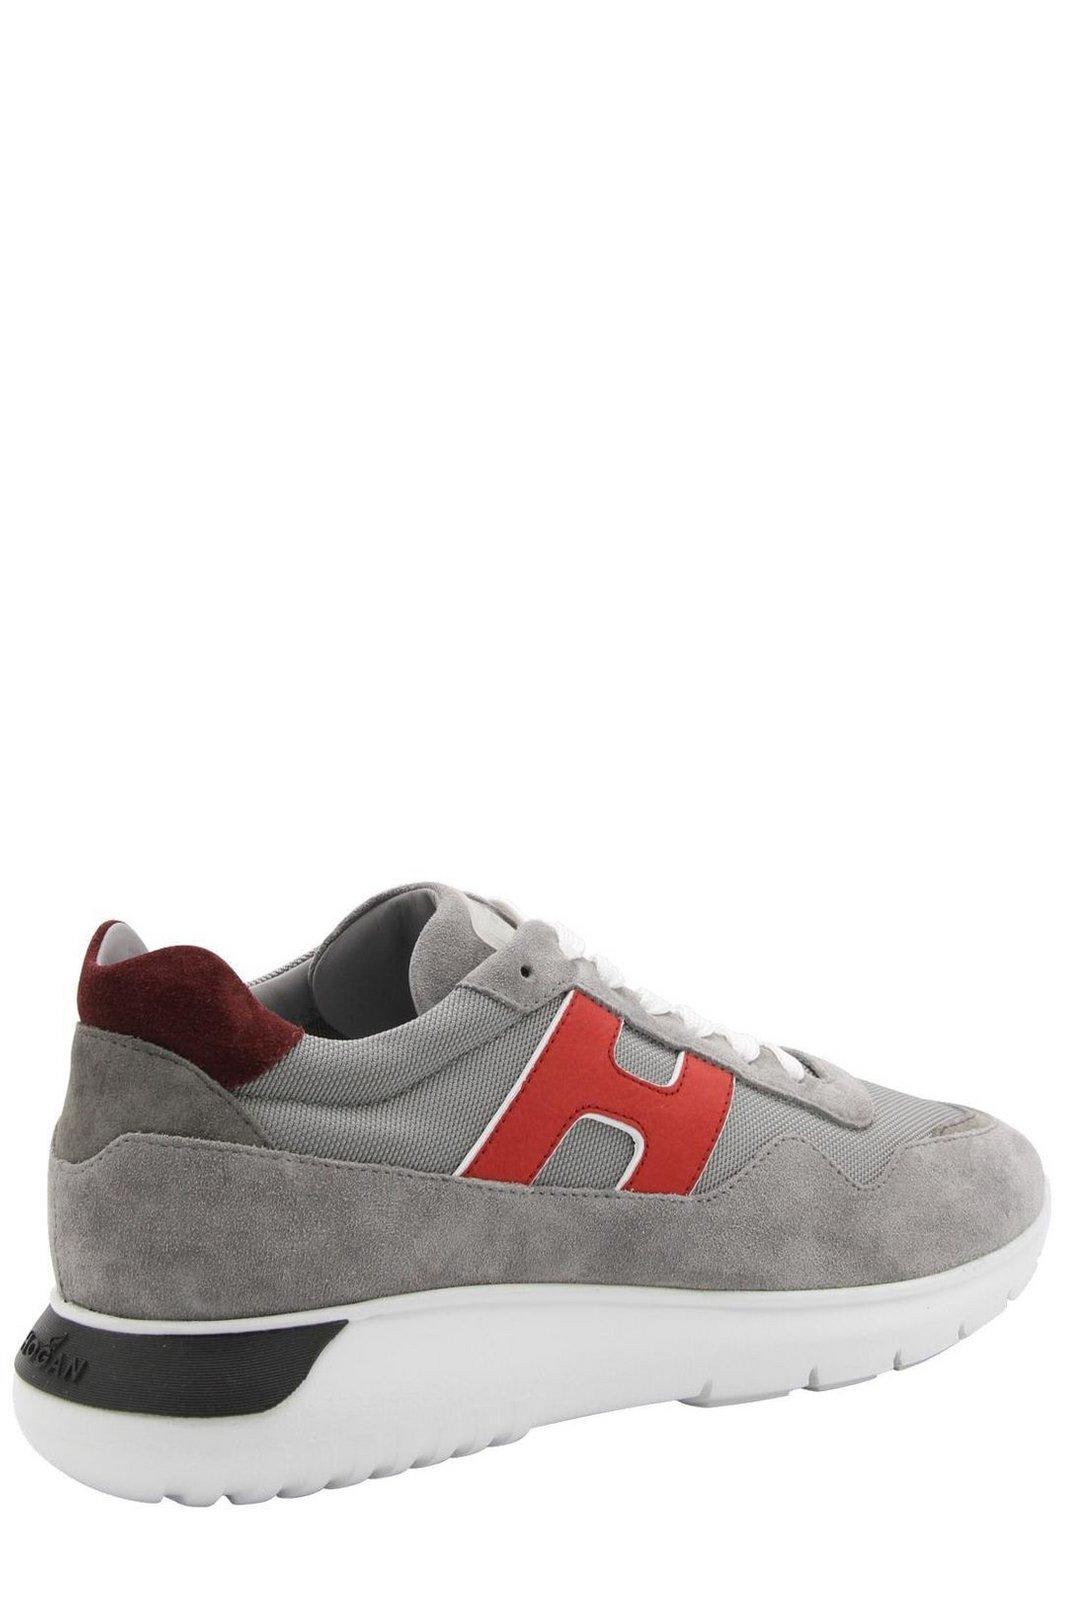 Shop Hogan Grey And Red Suede Interactive Sneakers